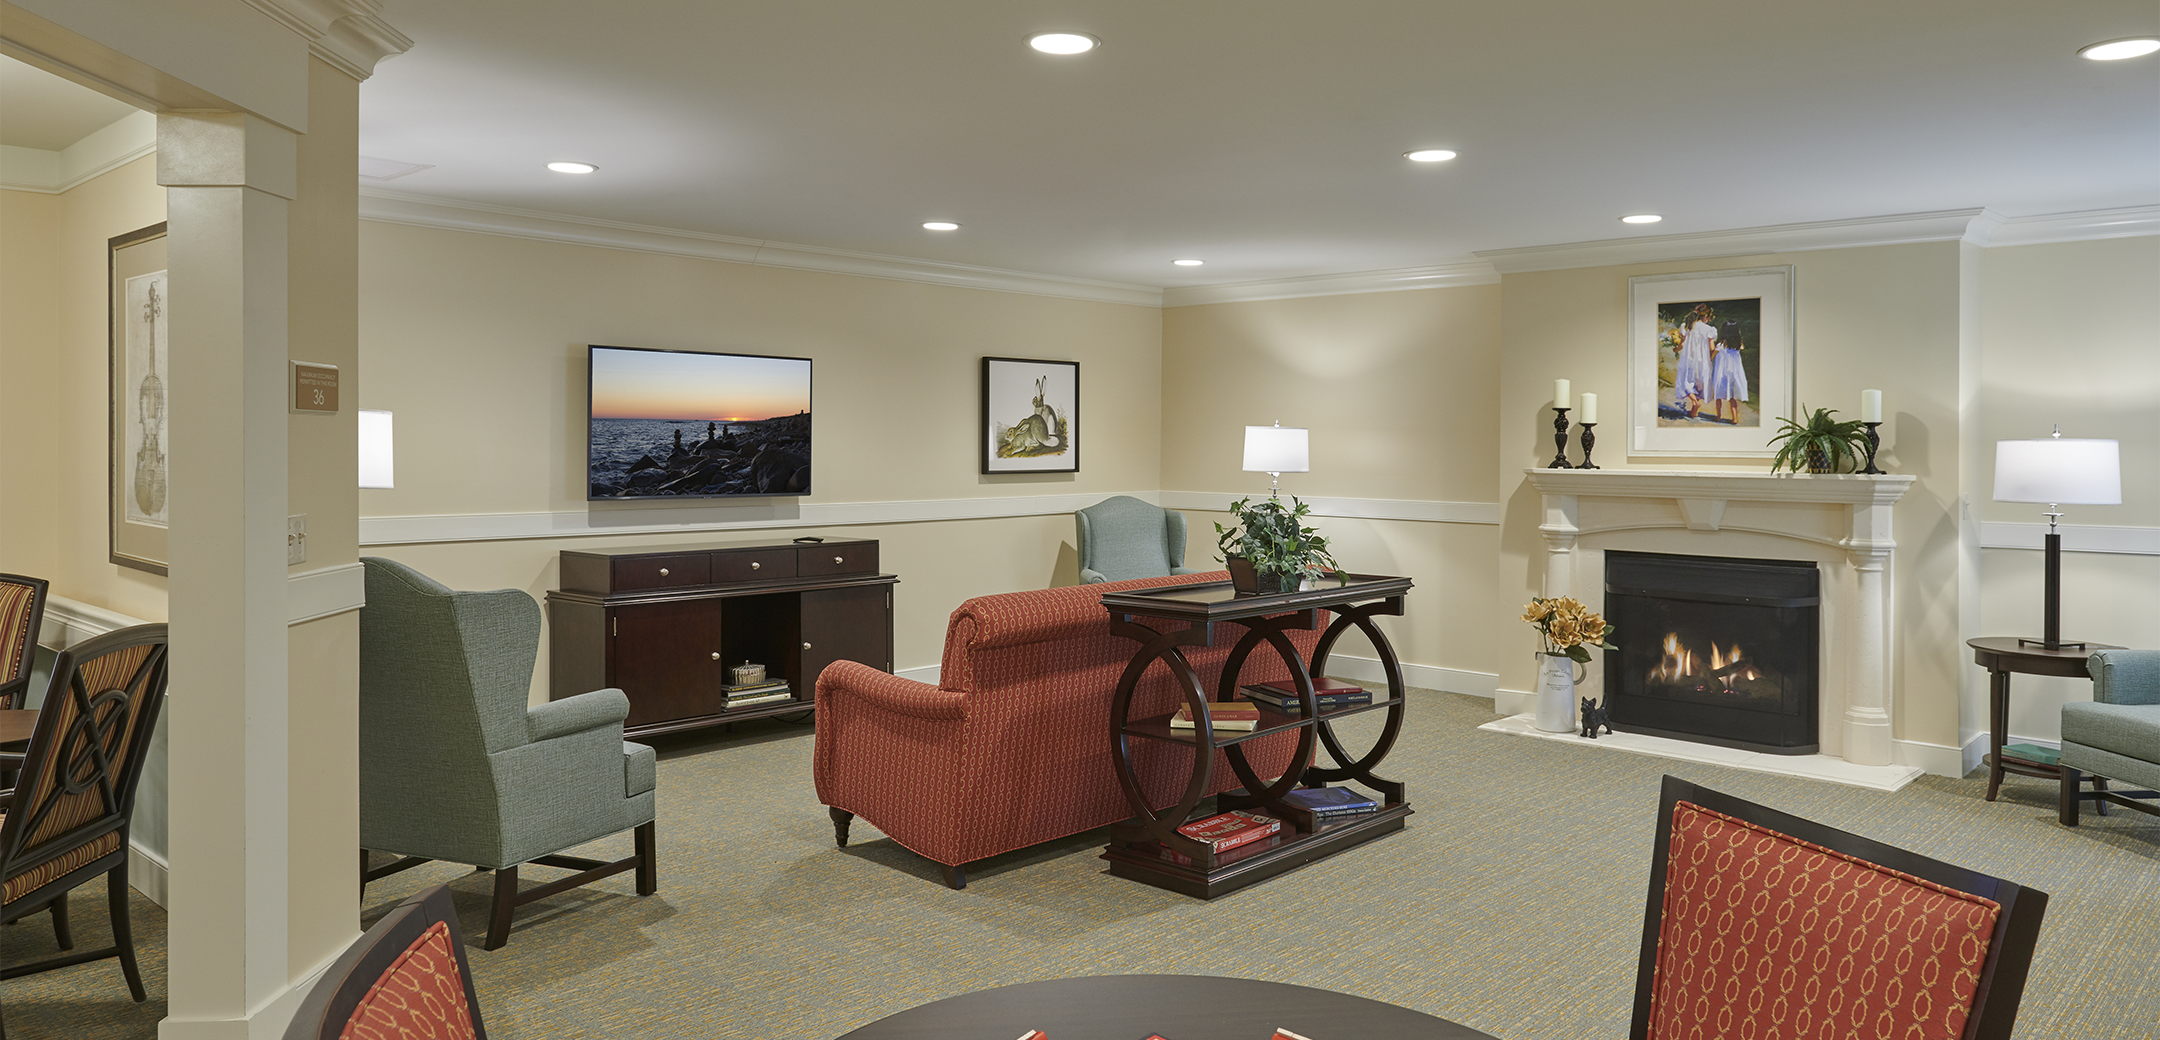 An interior view of the Artis Senior Living cream colored living room with a fireplace and couches towards the tv, table and seating in the foreground.